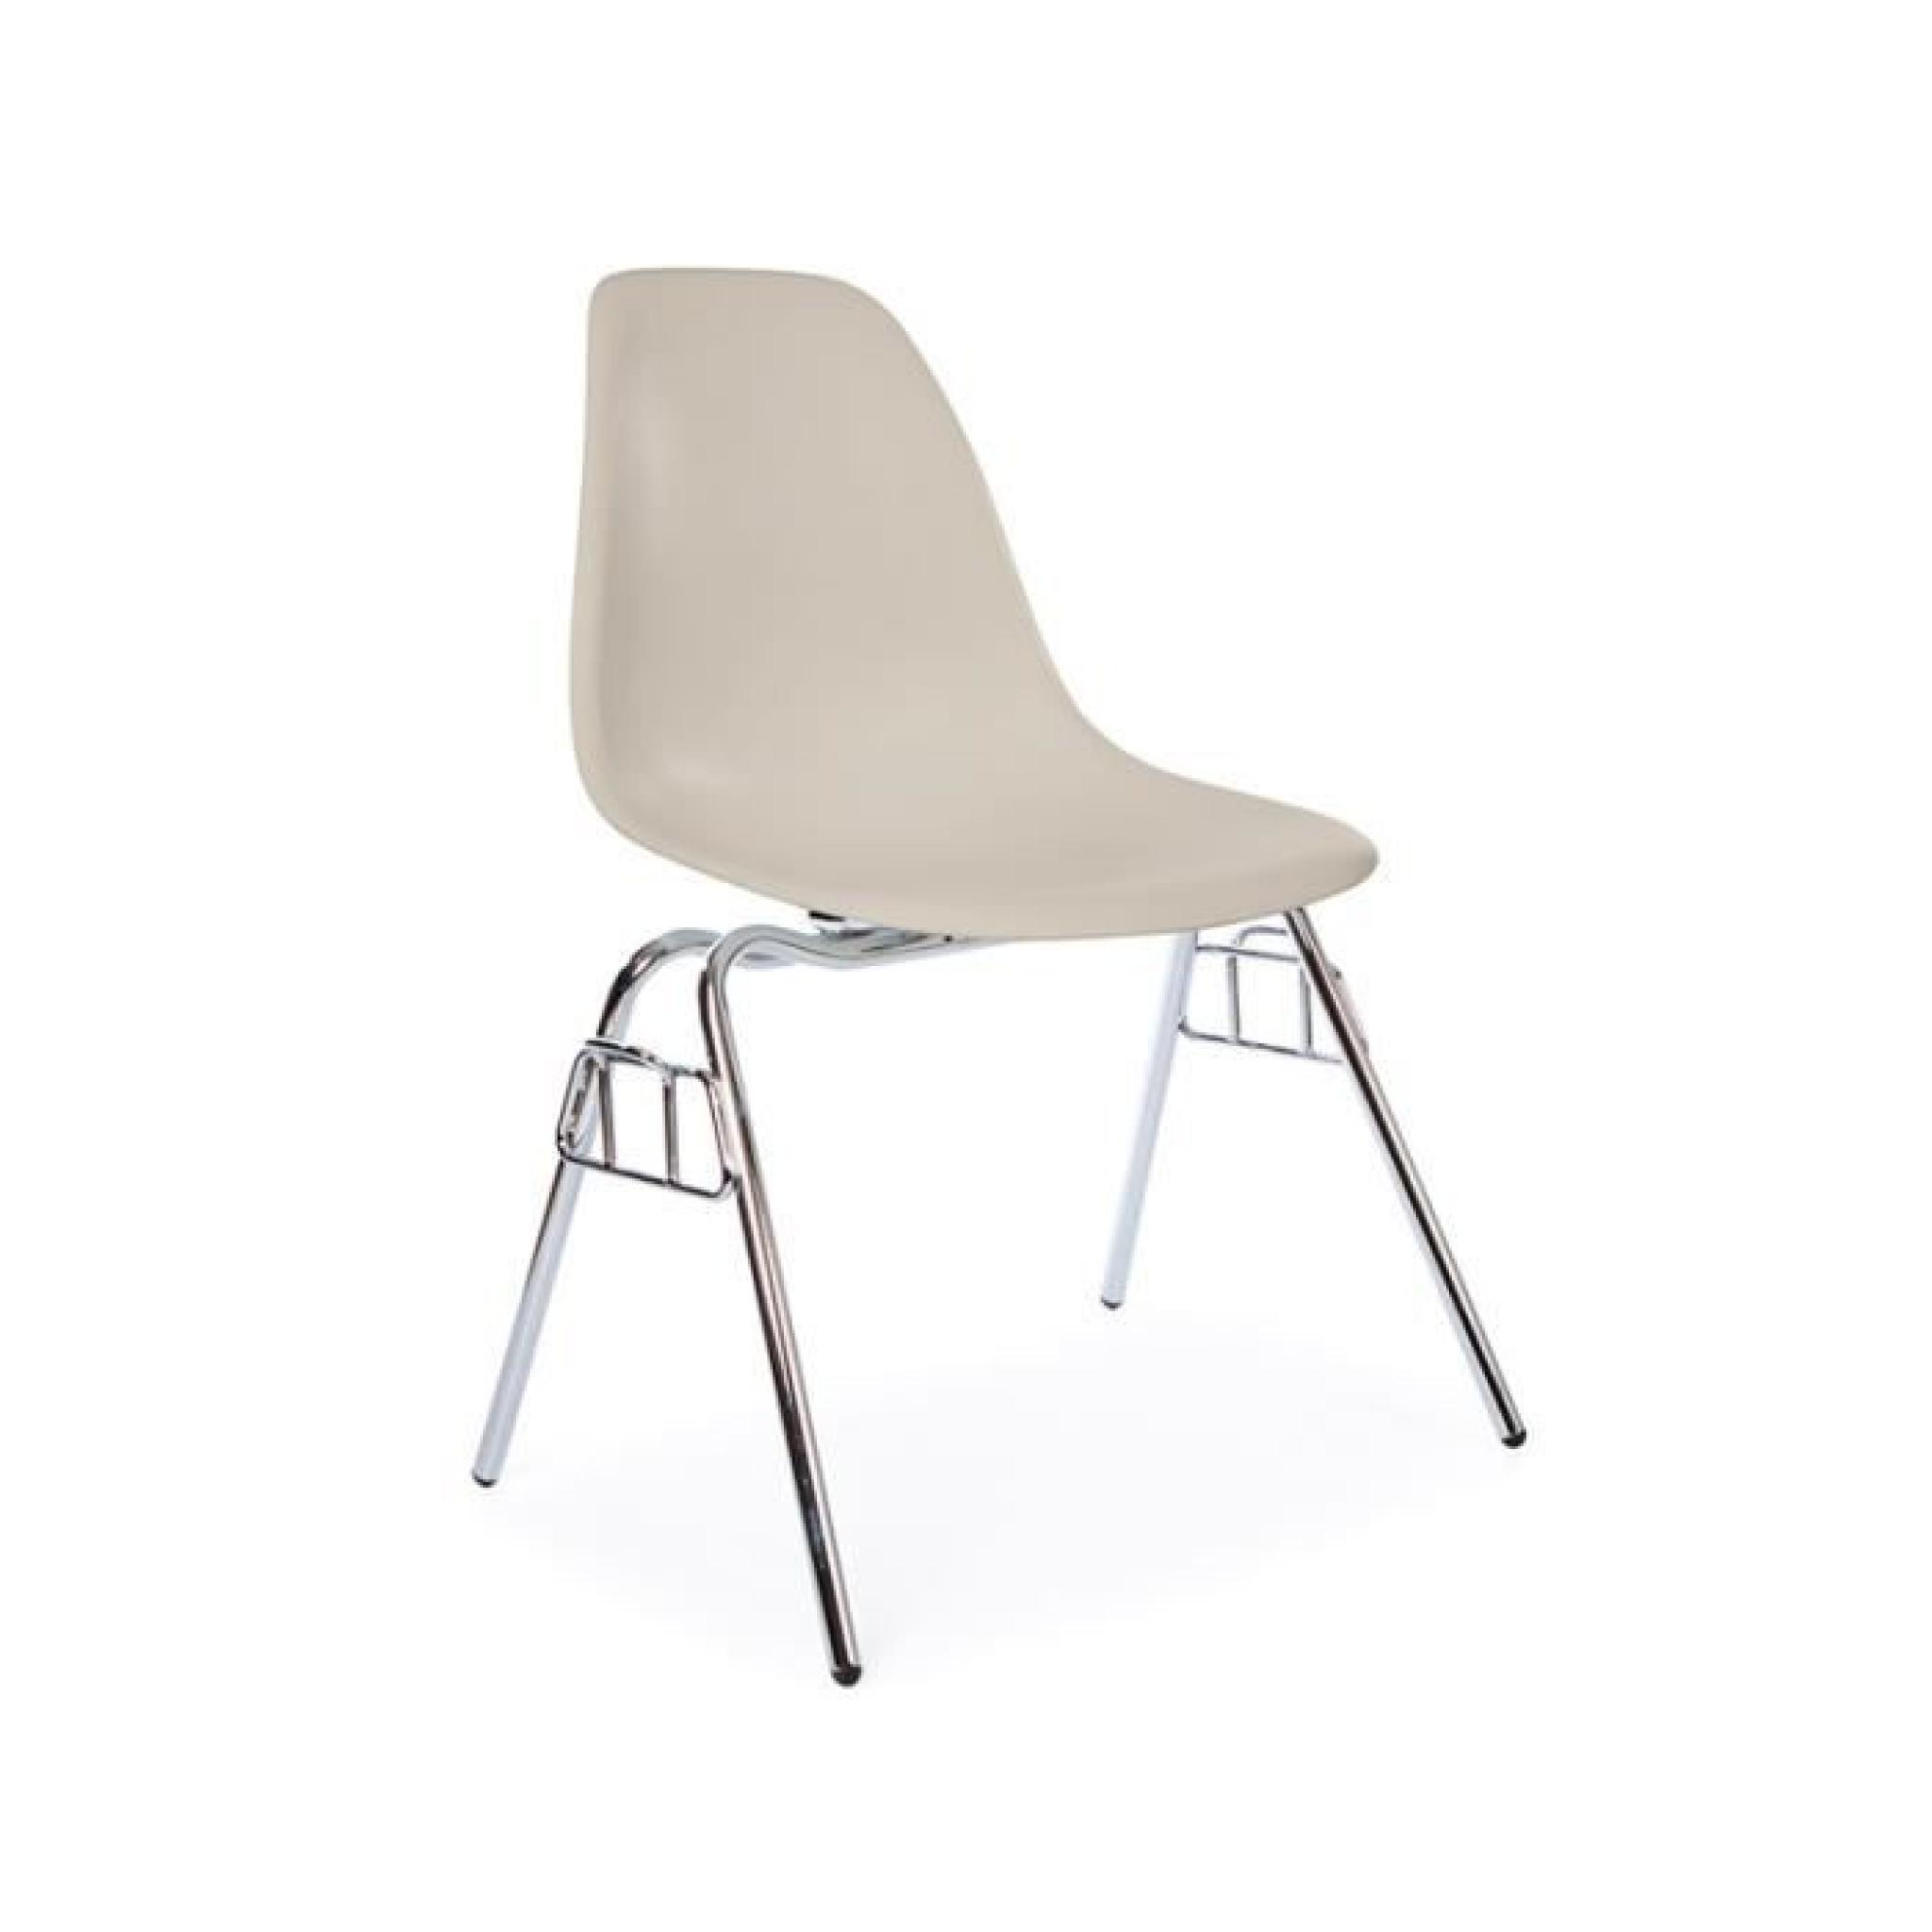 Chaise DSS empilable - Gris clair